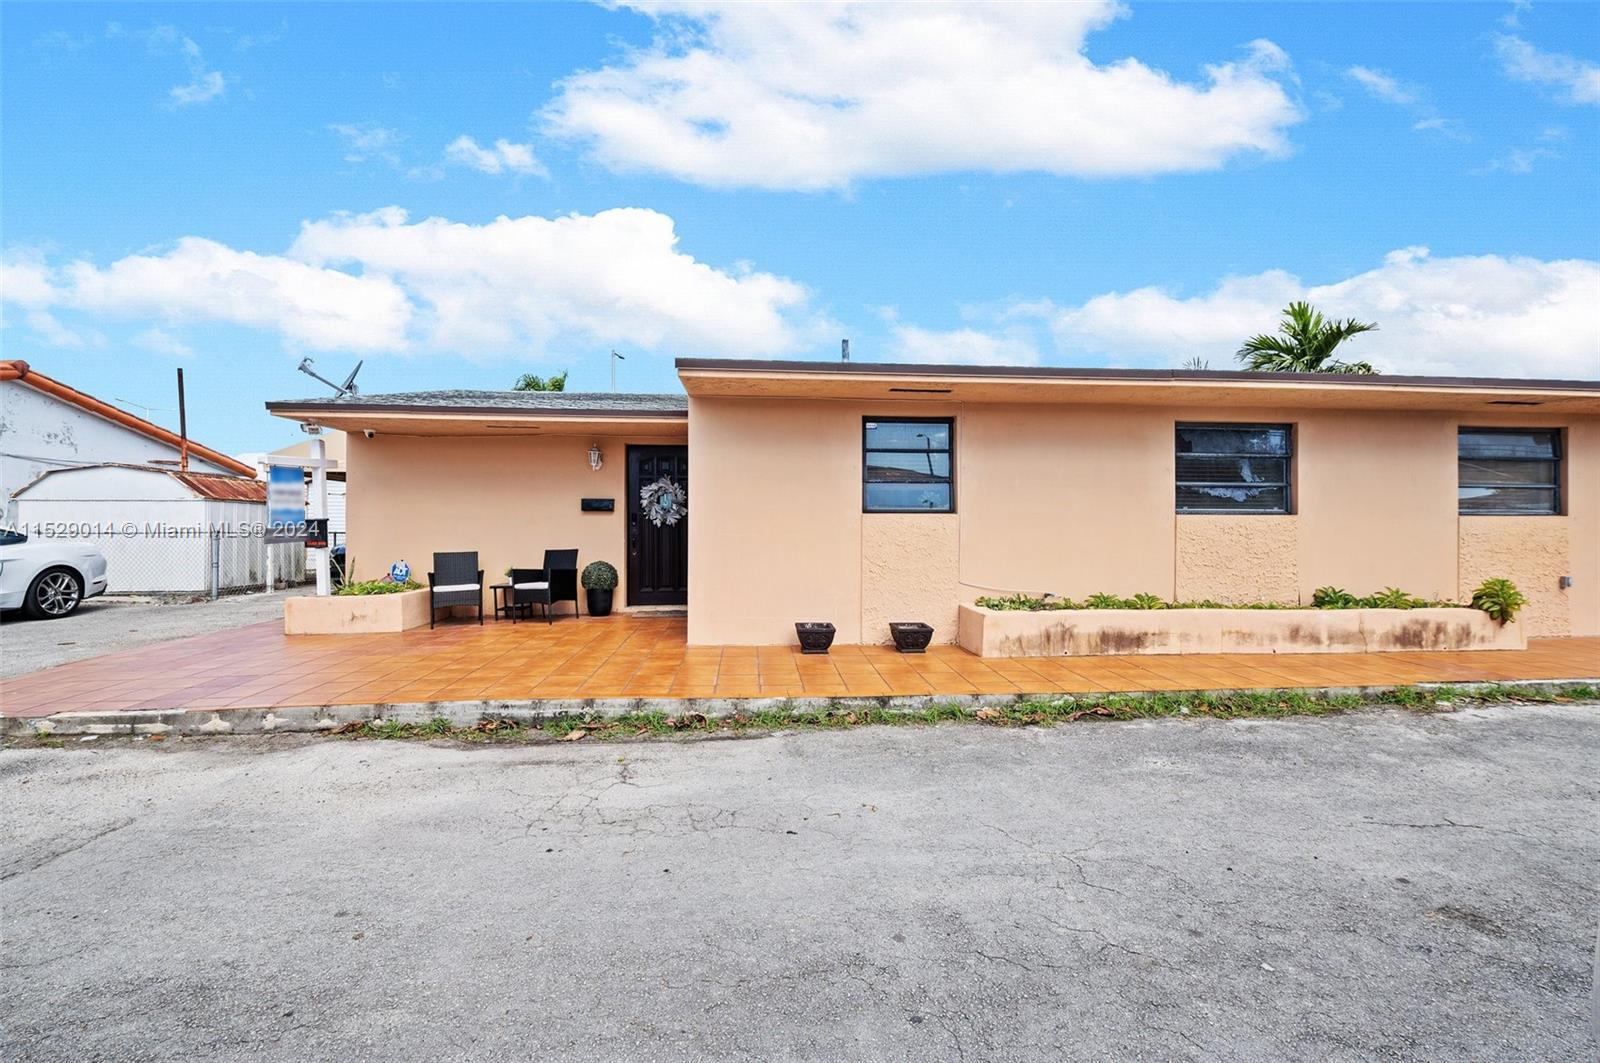 Photo of 1307 NW 36th Ave in Miami, FL